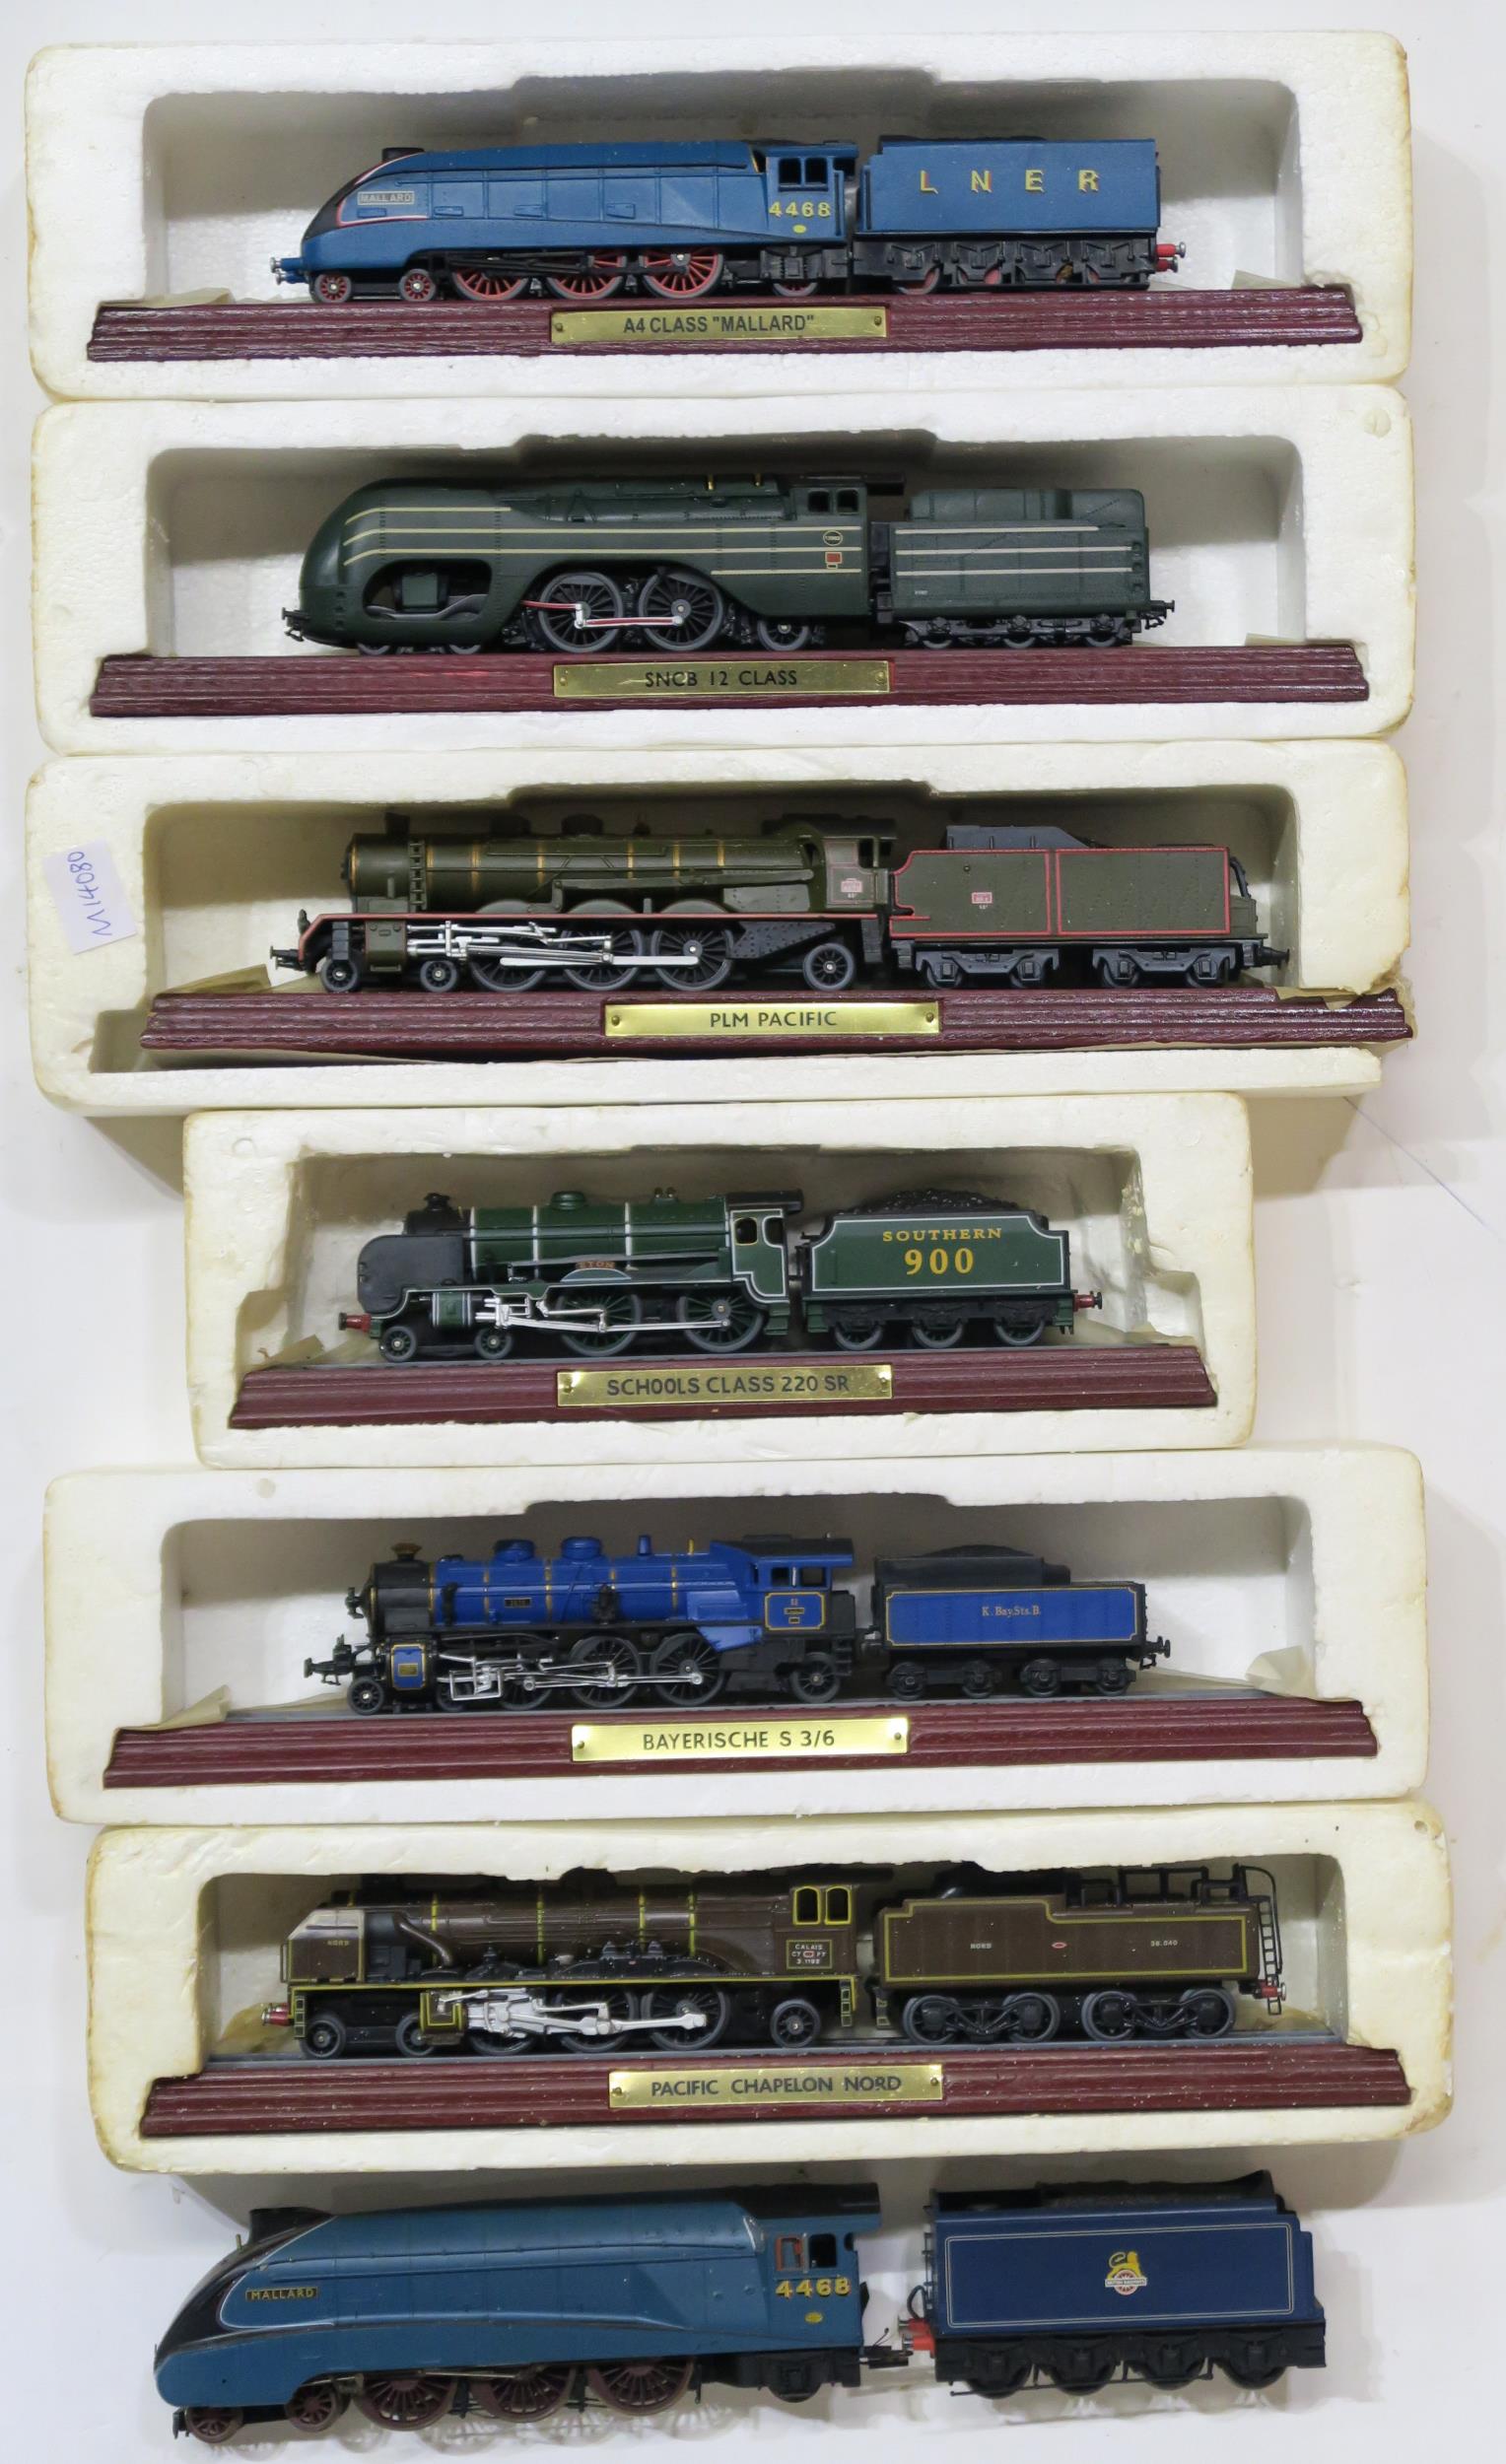 Assorted 1:87/HO-scale model kits by Revell and Esci, together with Hornby 'Mallard' locomotive - Image 2 of 2